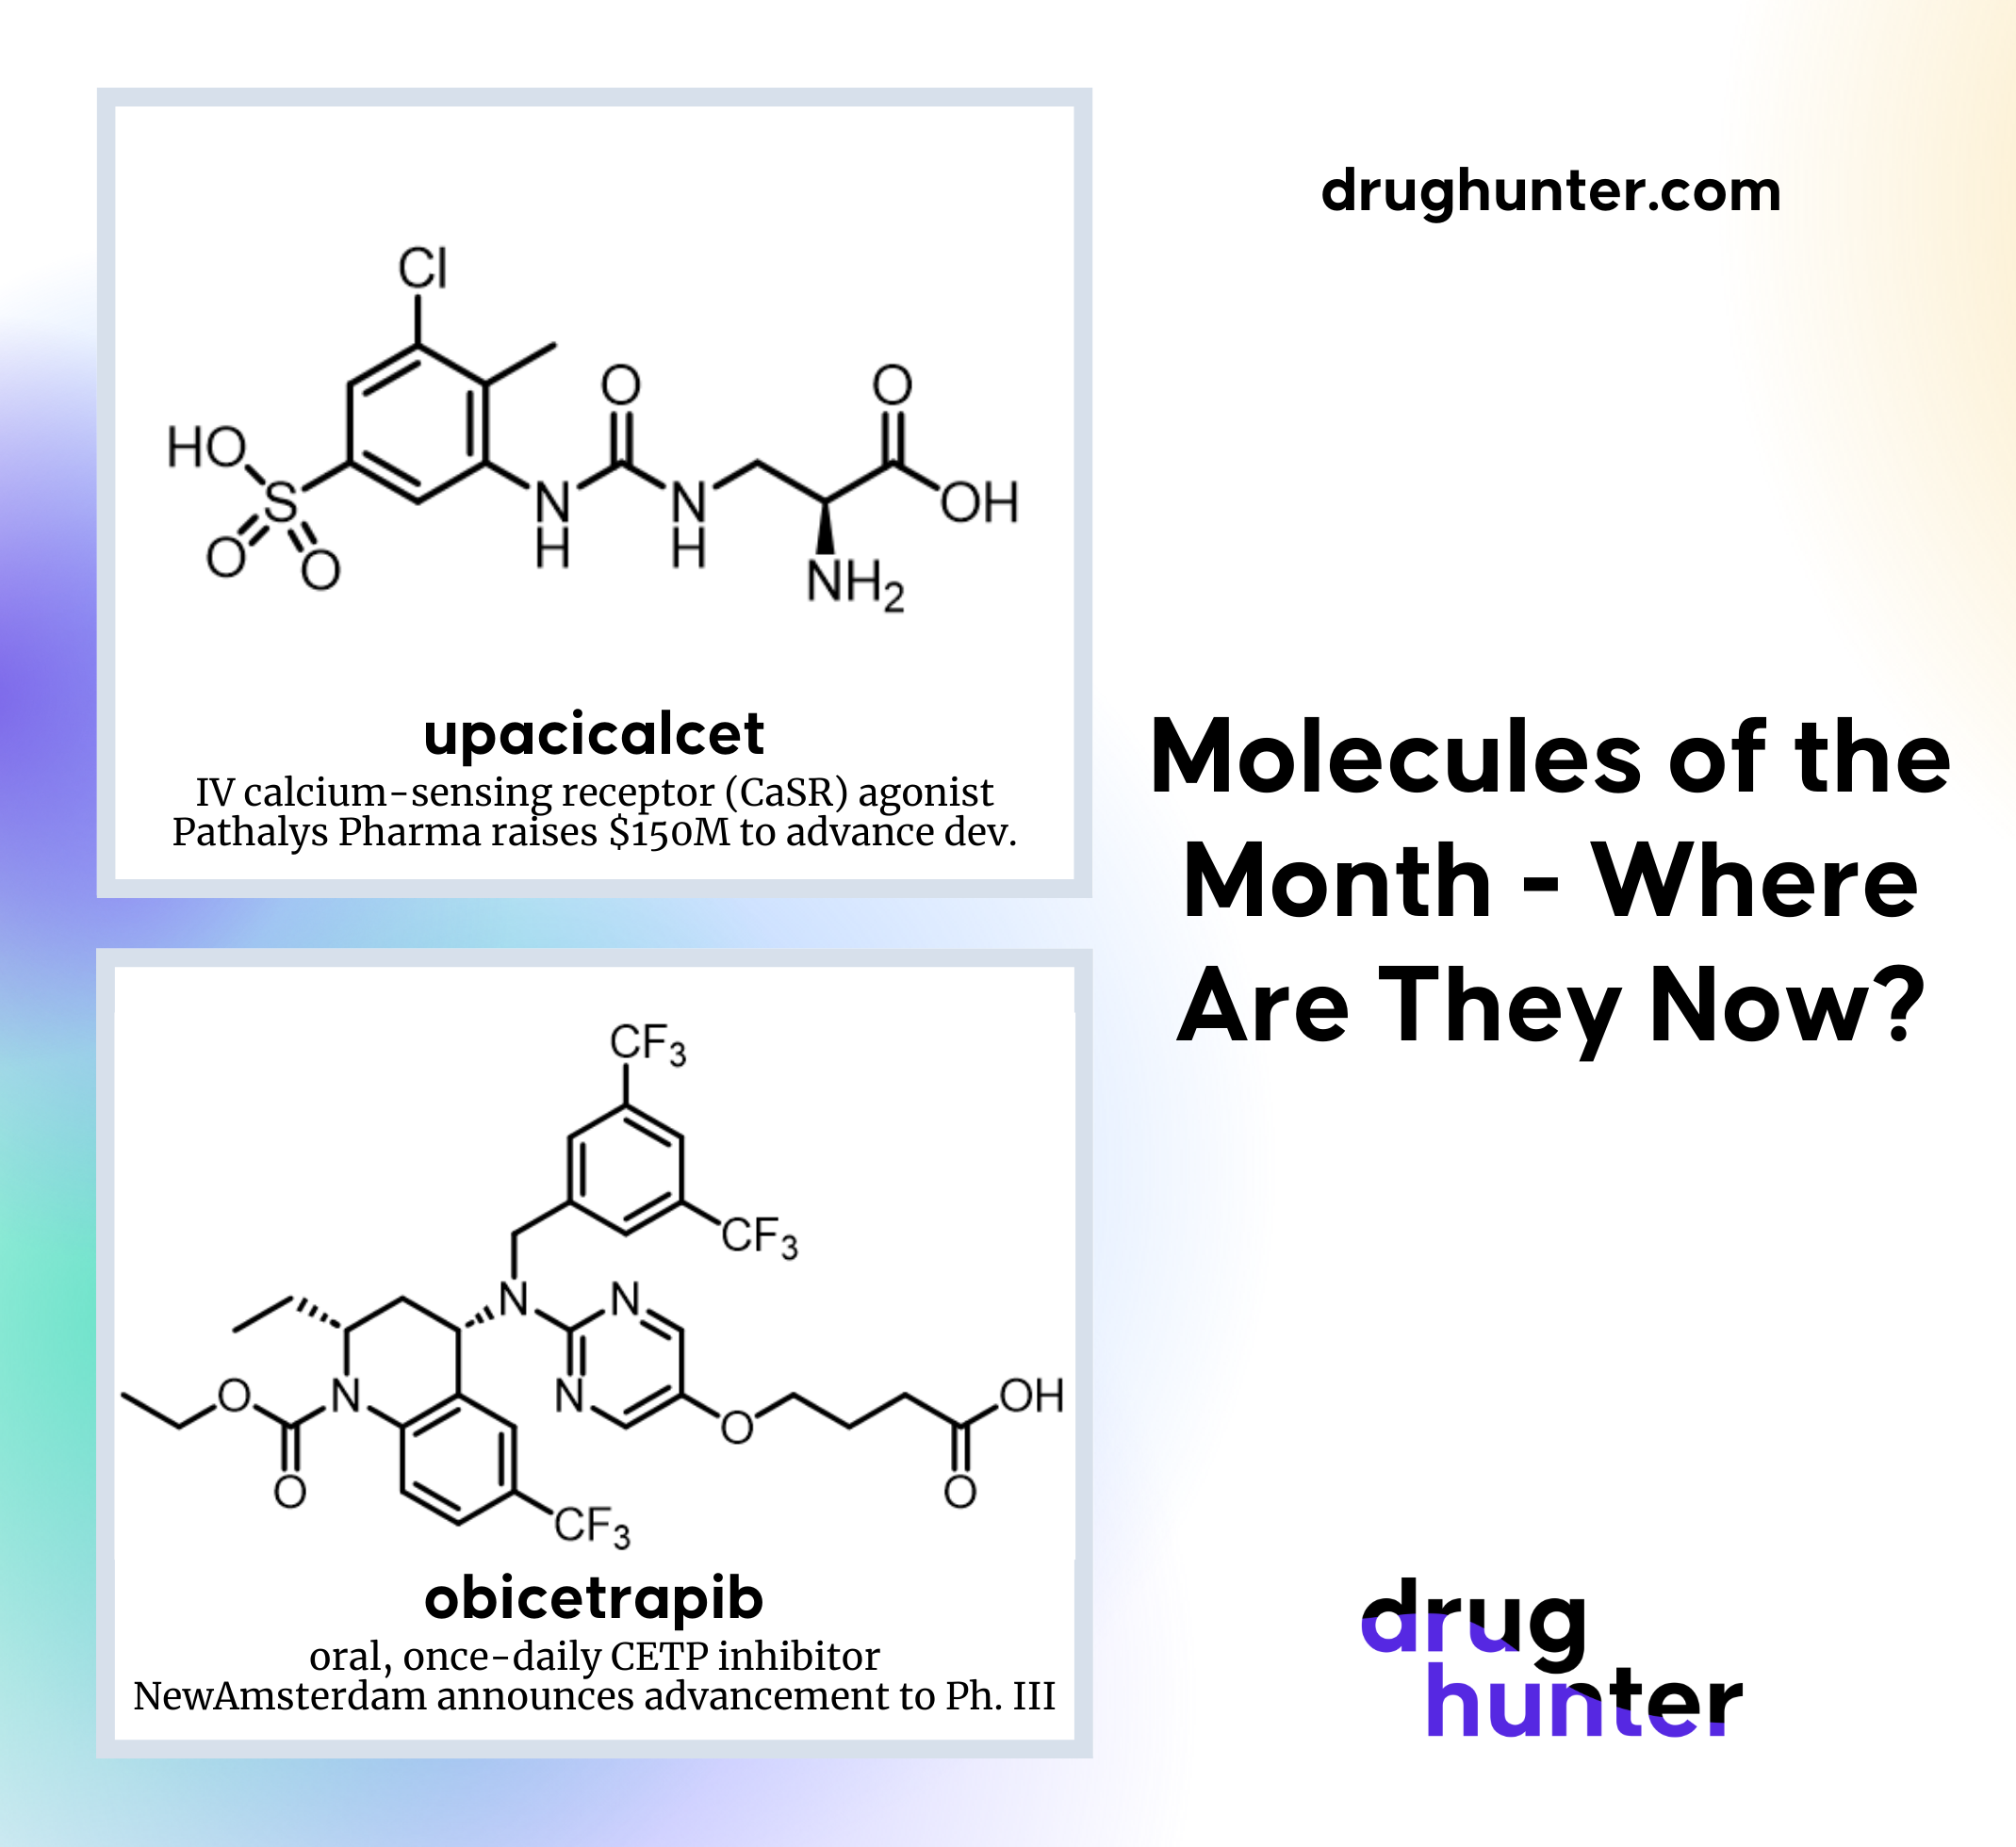 Molecules of the Month - Where Are They Now?